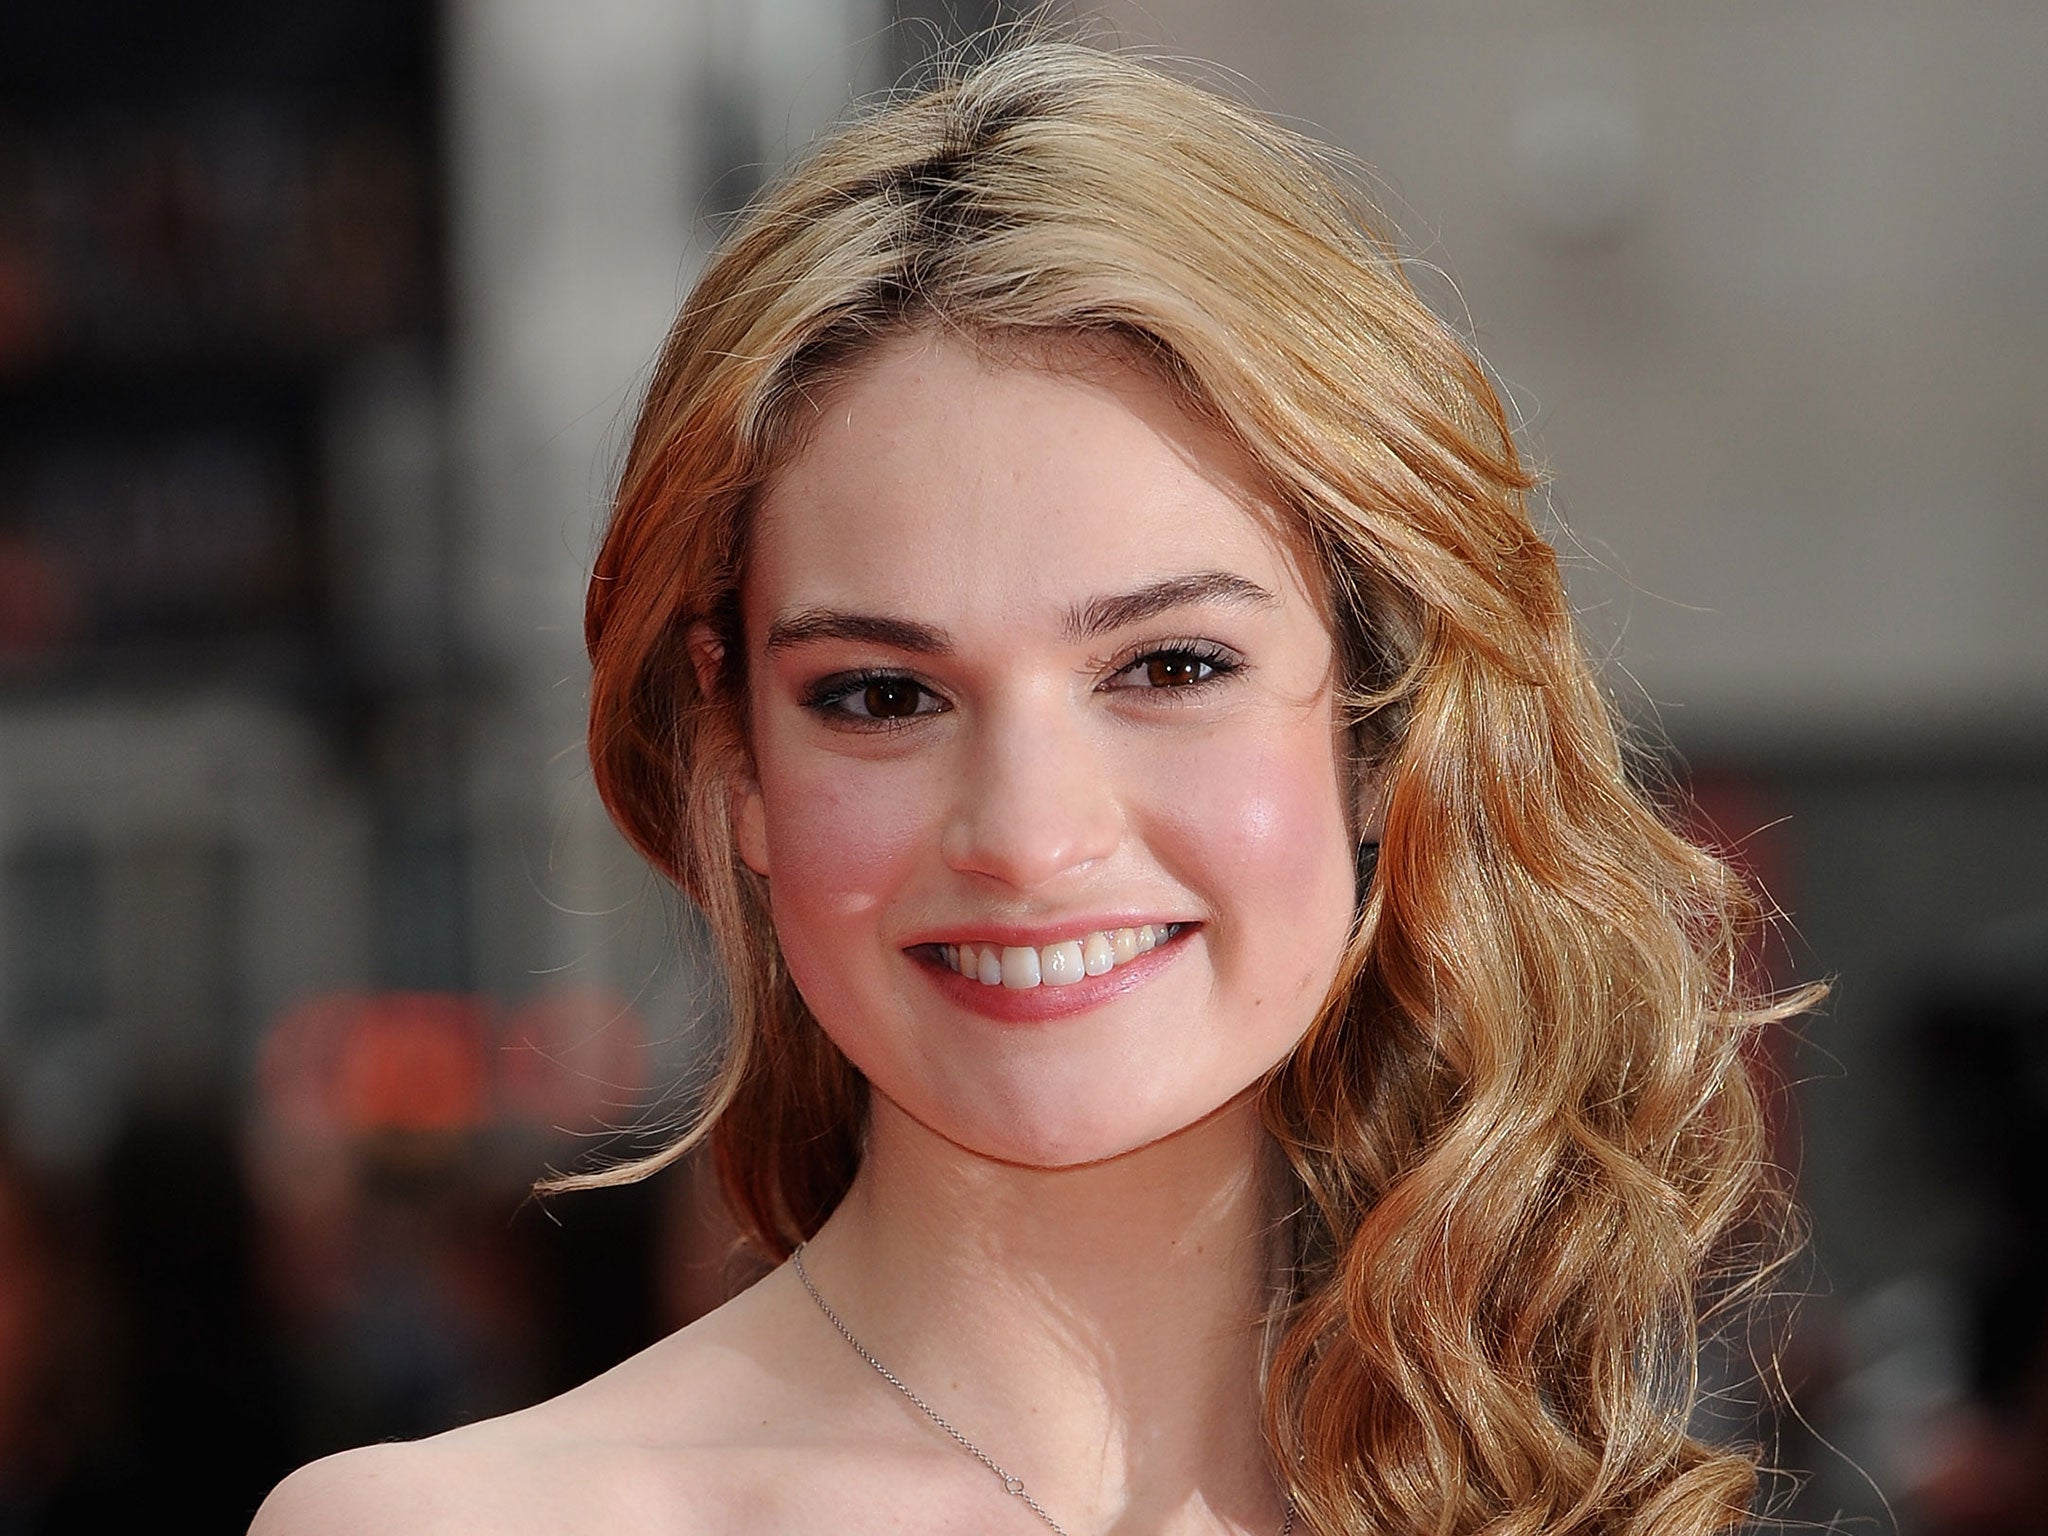 Lily James plays Lady Rose in Julian Fellowes’ period drama